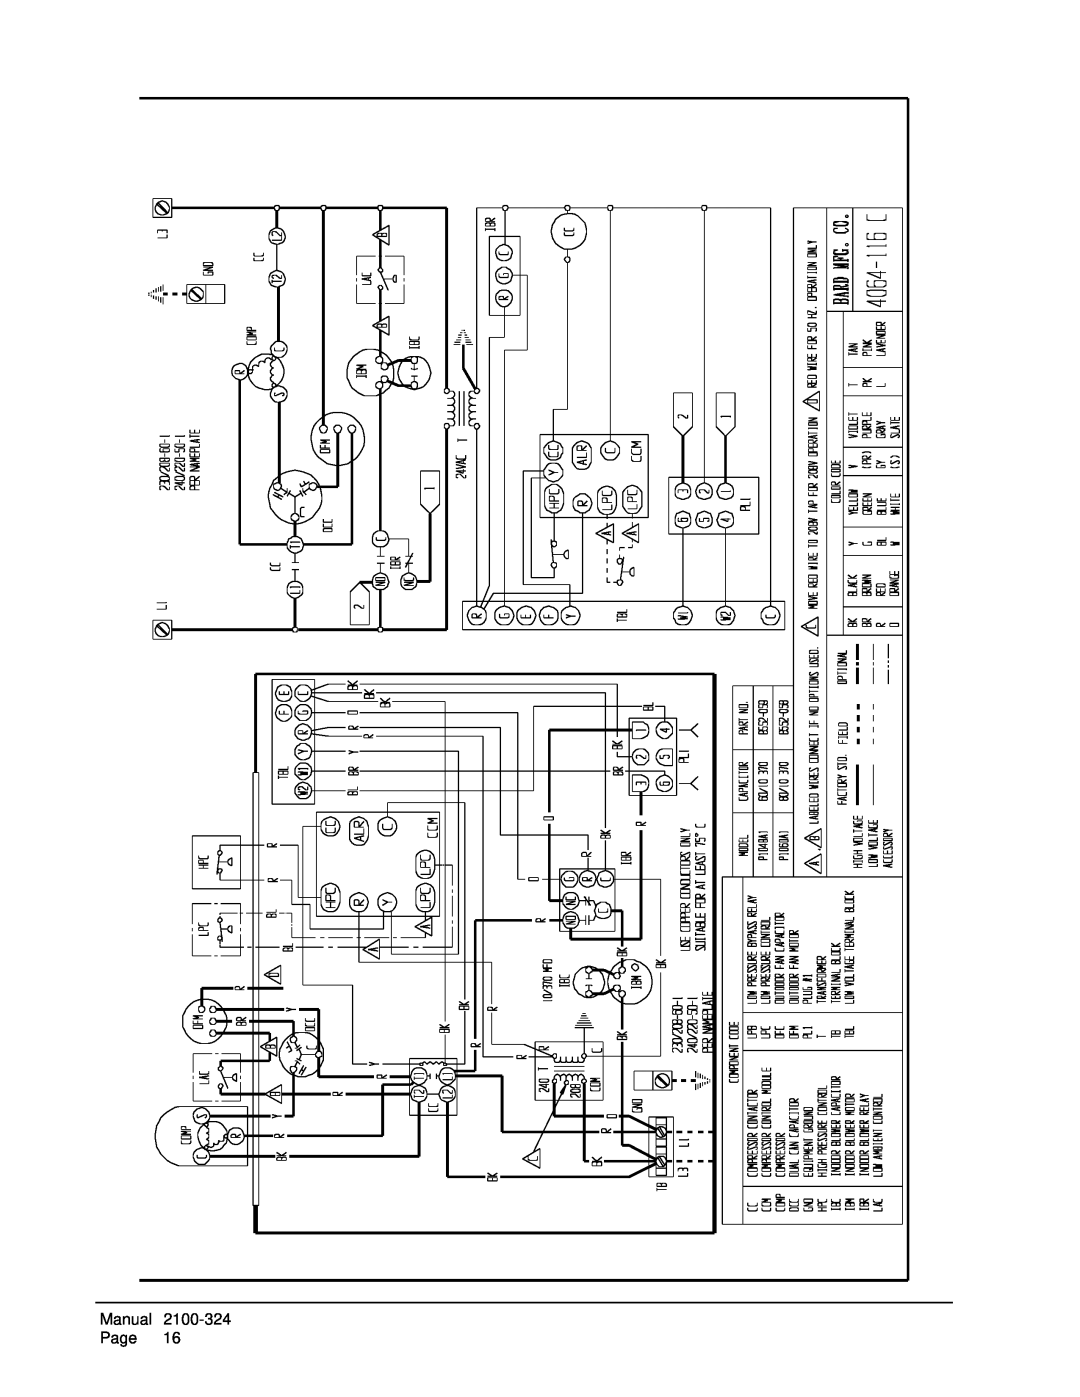 Bard P1148A1, P1142A3, P1060A1 installation instructions Manual, Page 